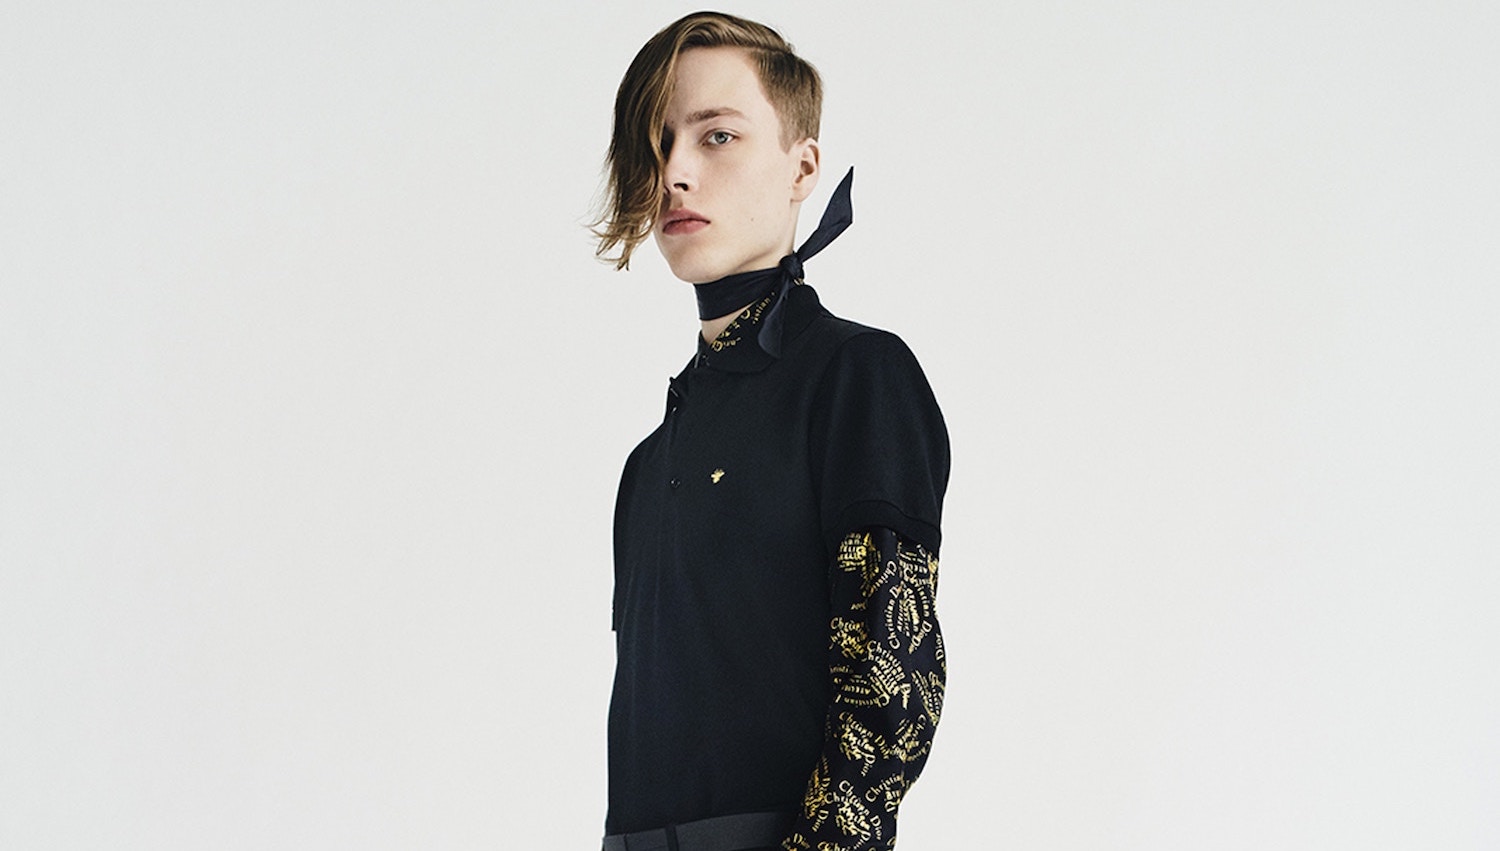 Dior Homme “Gold” Capsule Collection